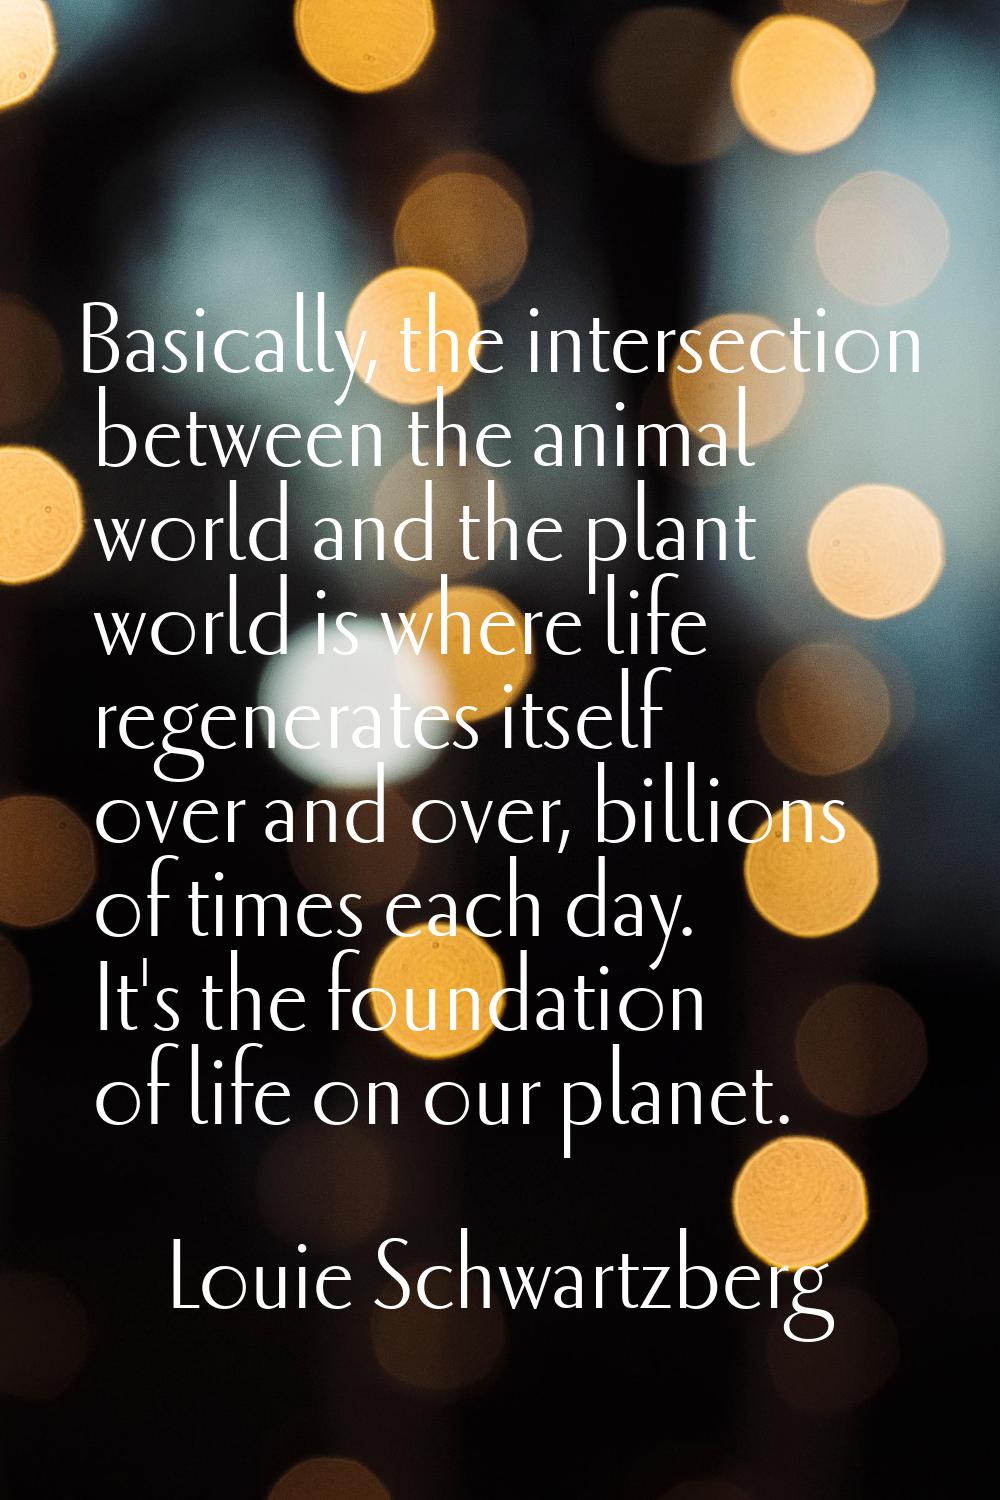 Basically, the intersection between the animal world and the plant world is where life regenerates 